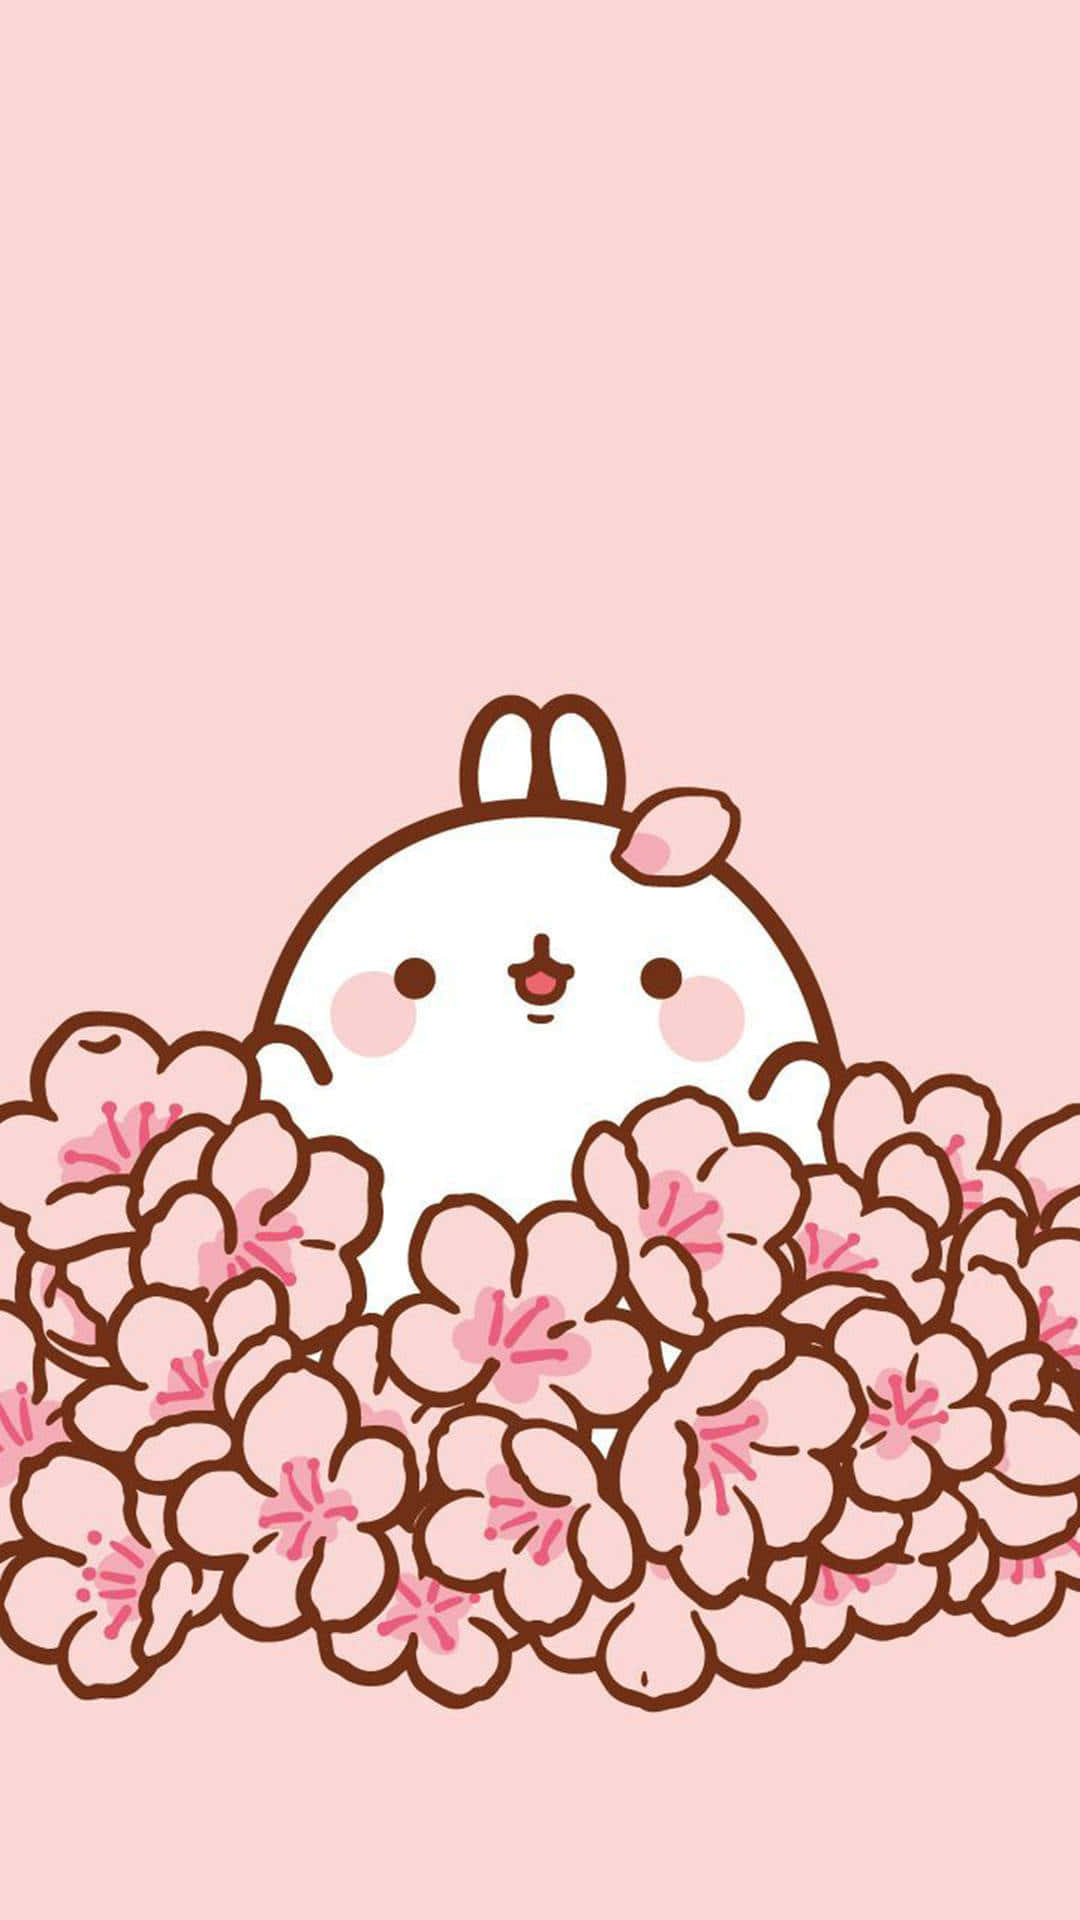 Cute Kawaii Molang With Flowers Background